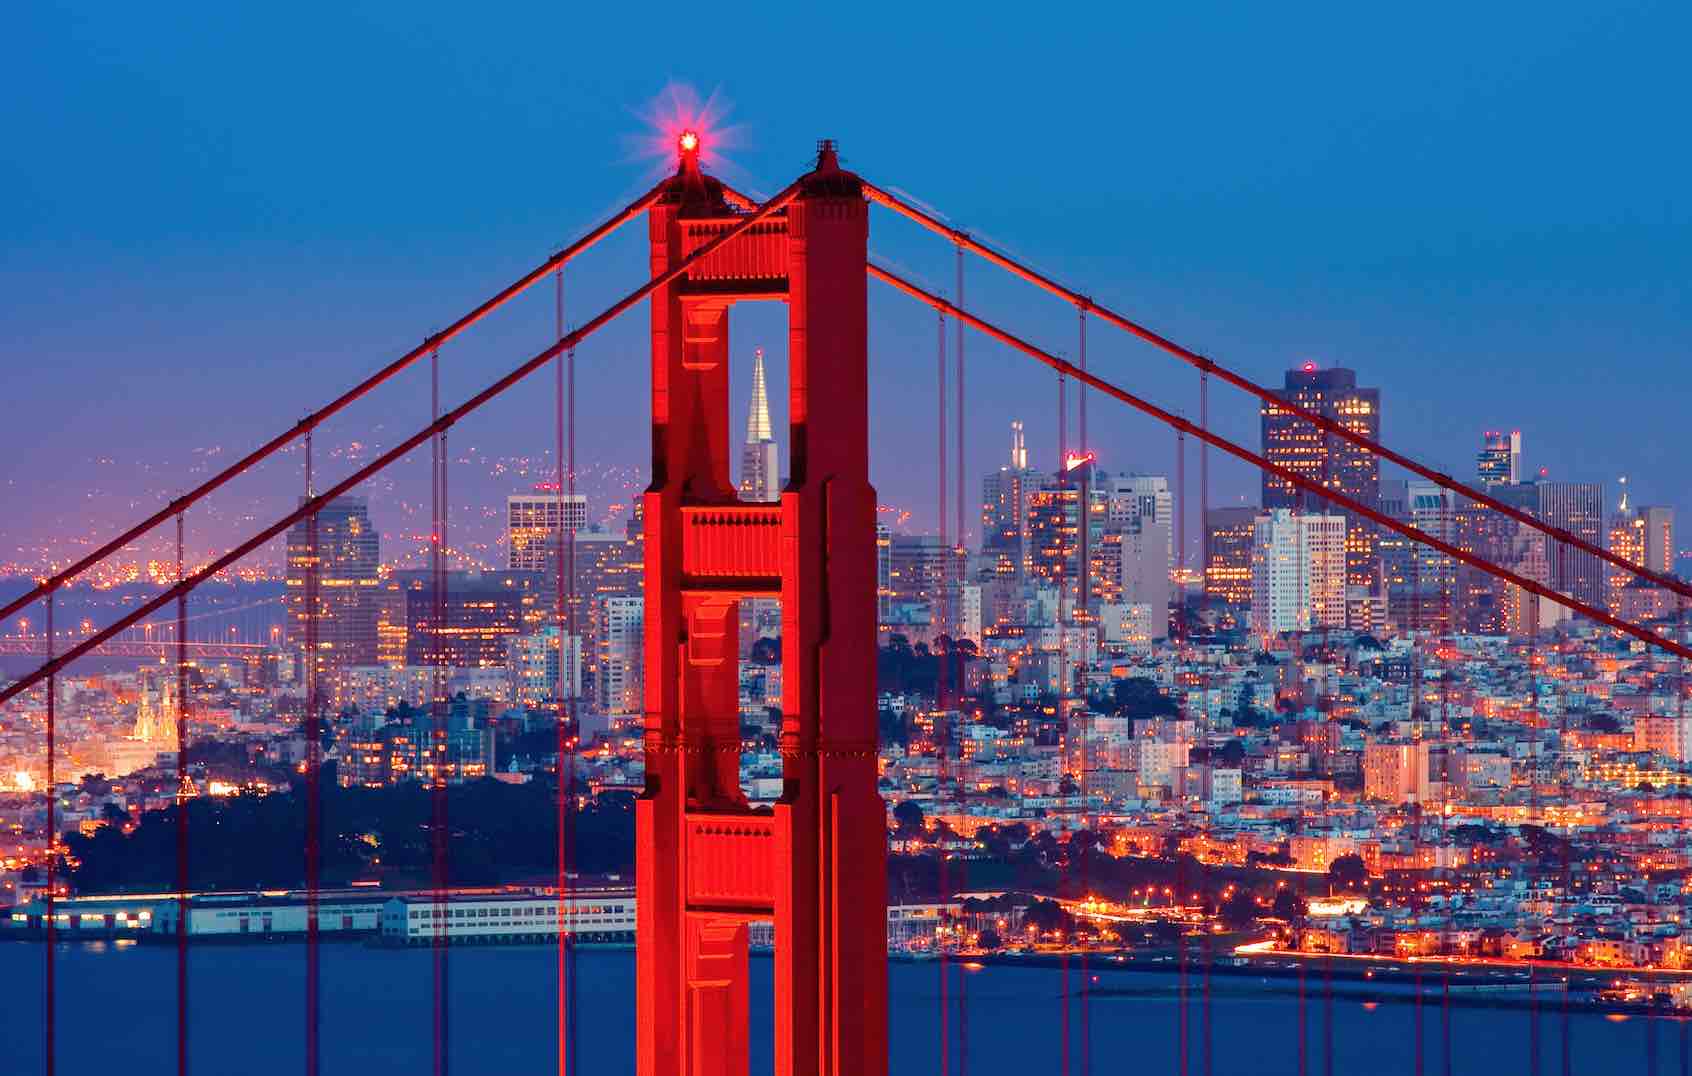 How to get to golden gate park from union square Best 9 San Francisco Hotels With View Of Golden Gate Bridge Hotelscombined Best 9 San Francisco Hotels With View Of Golden Gate Bridge